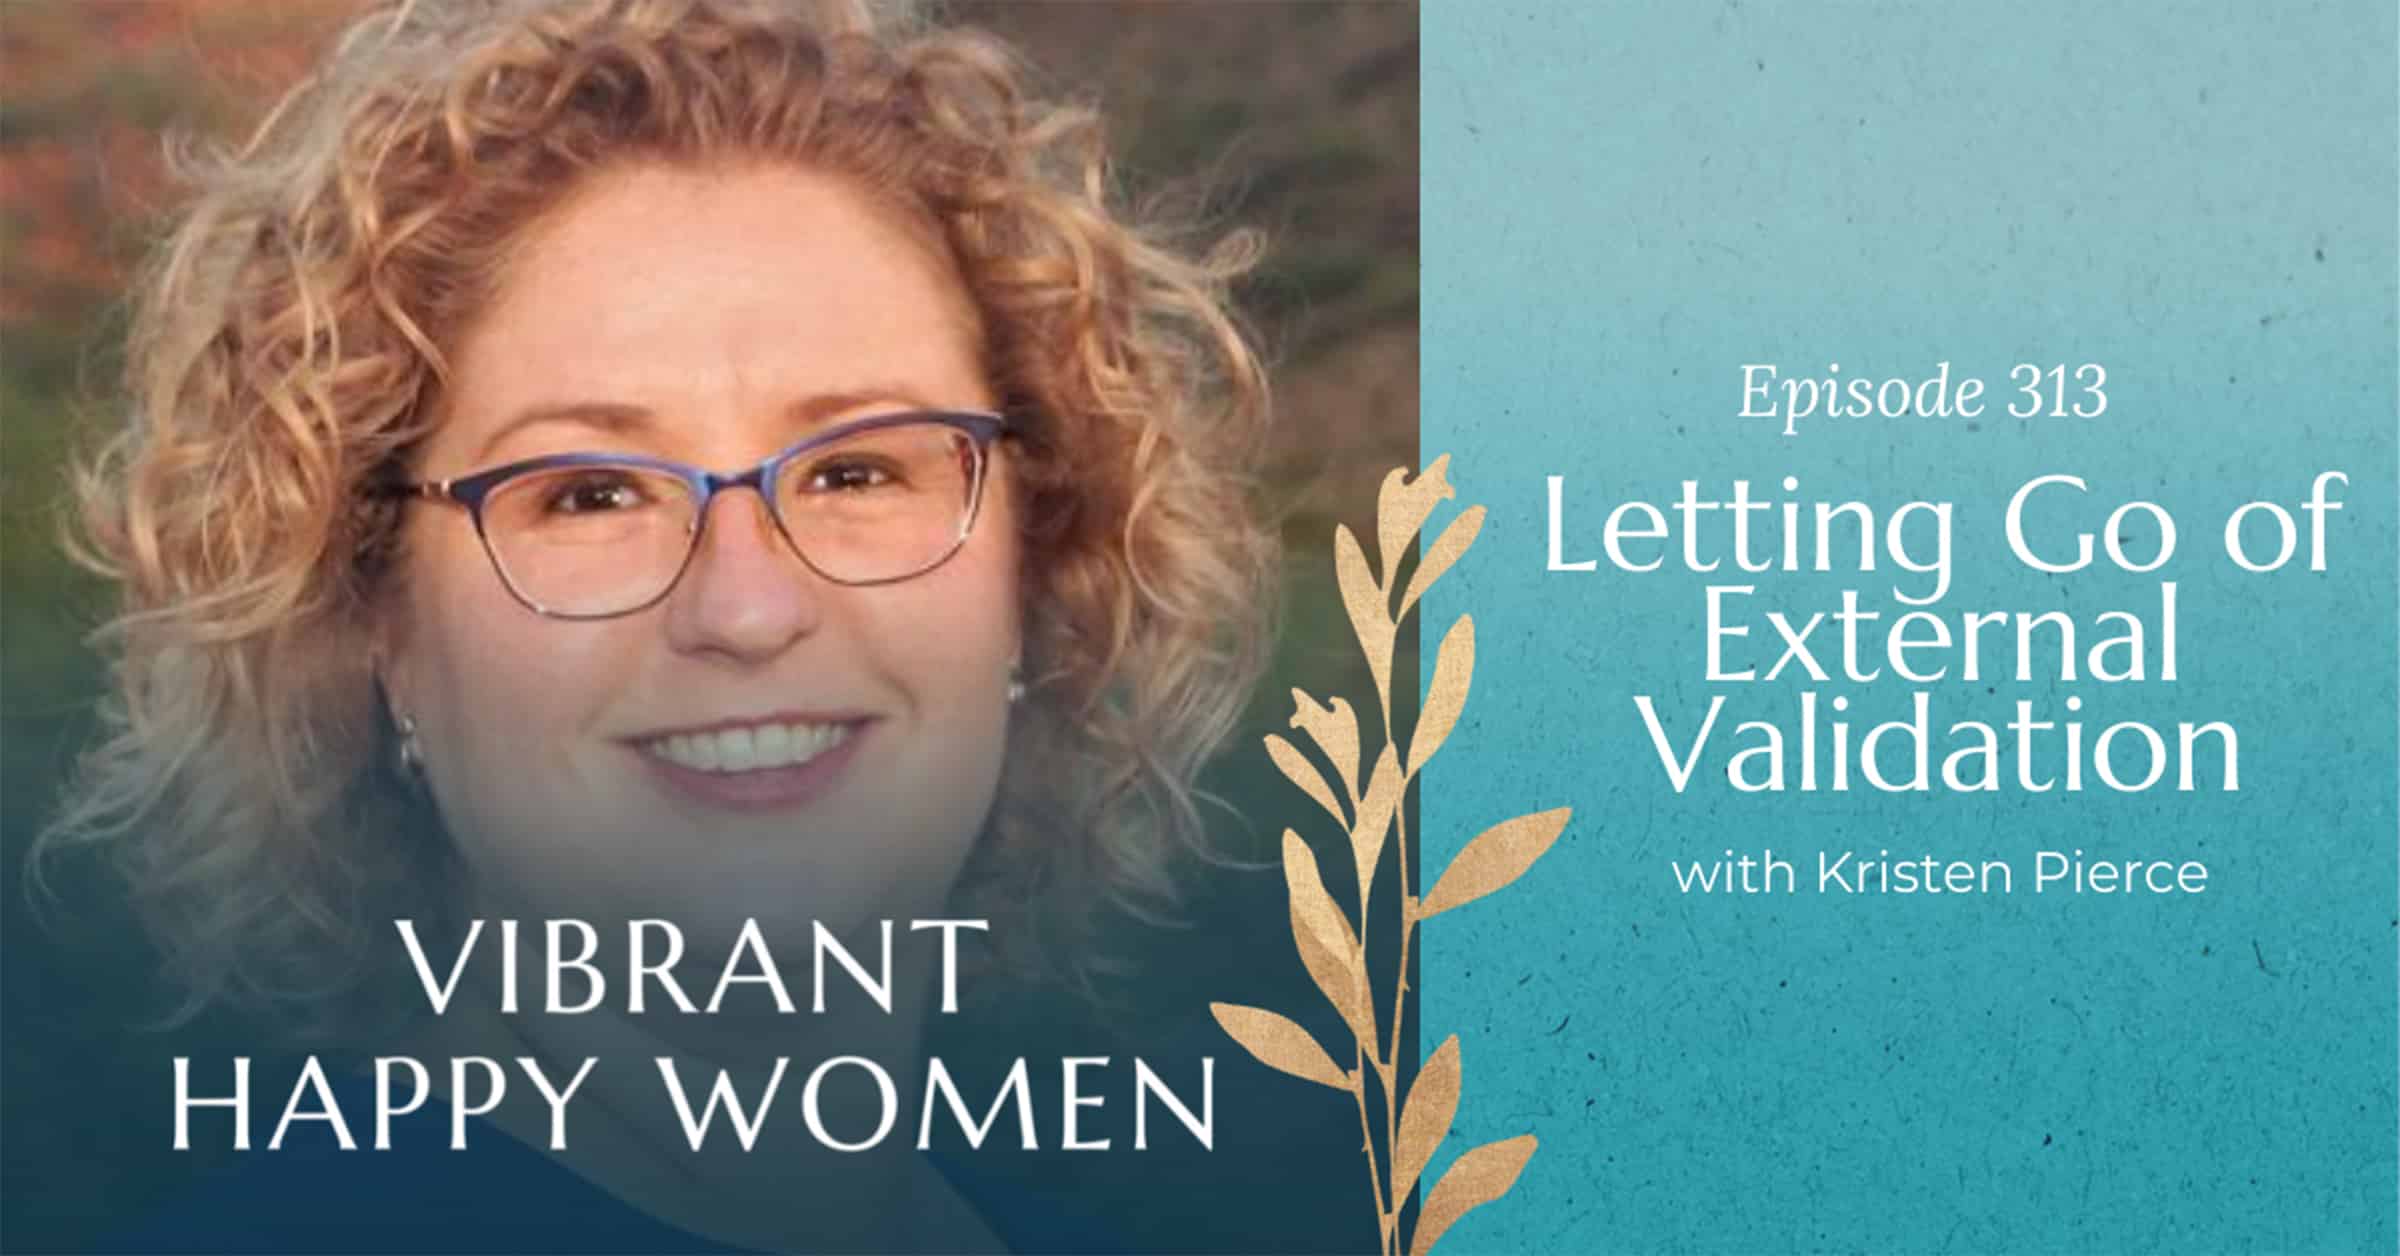 Vibrant Happy Women with Dr. Jen Riday | Letting Go of External Validation (with Kristen Pierce)